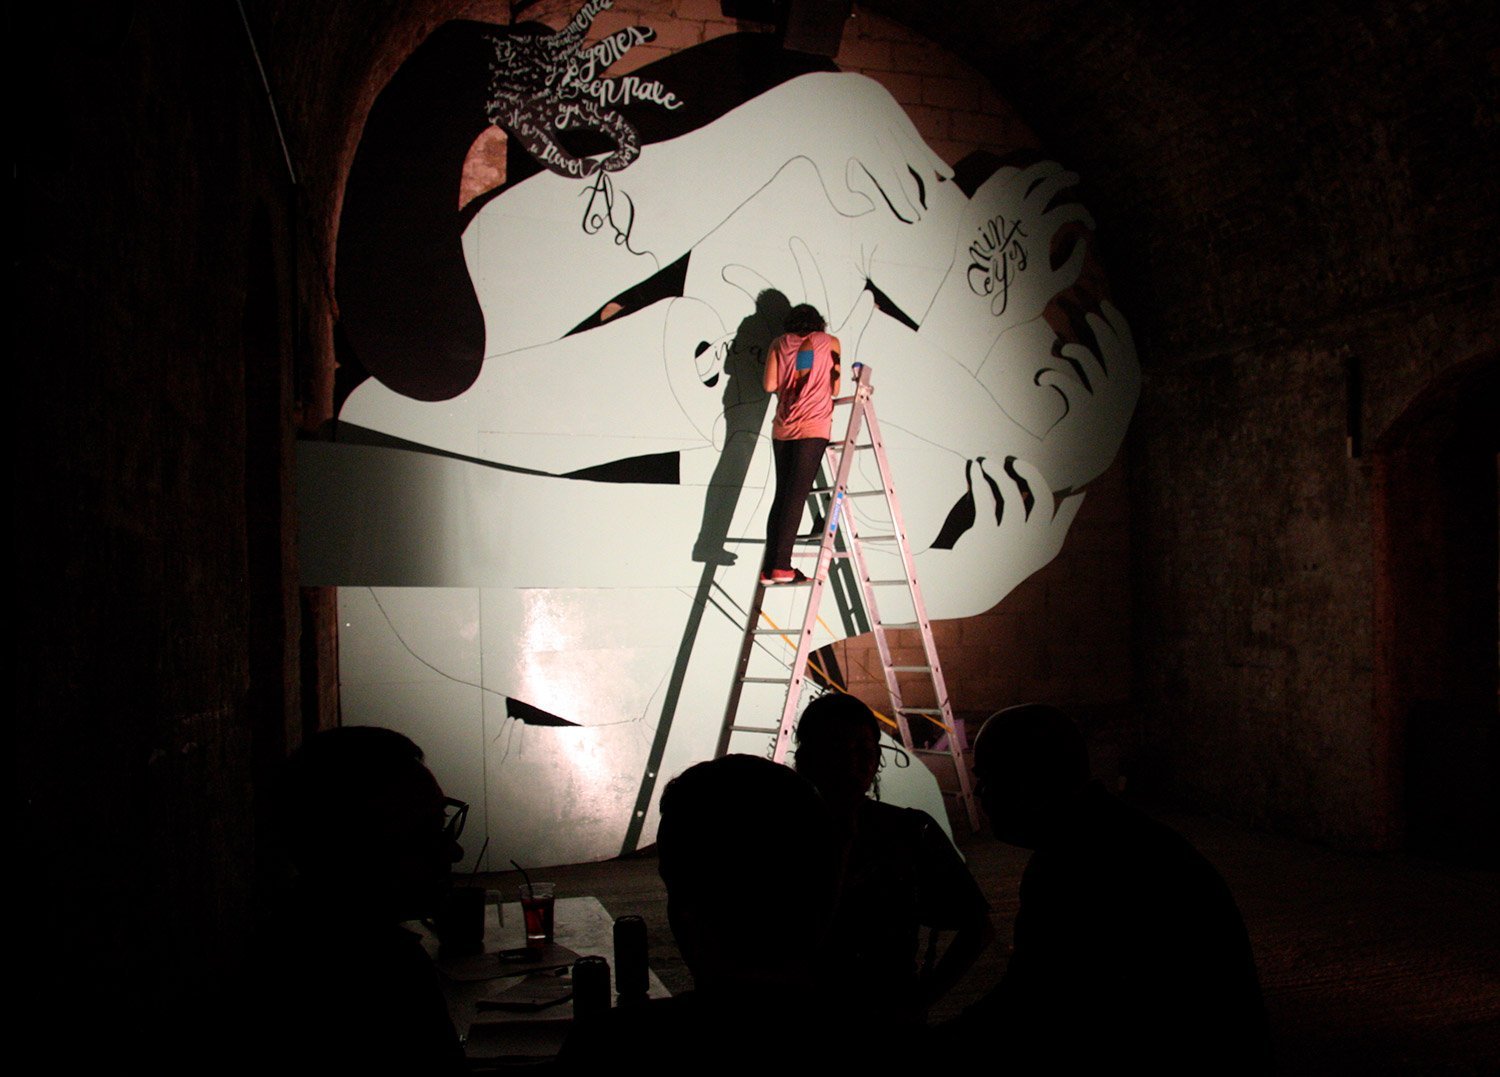 Live painting event, Cristina working on the installation Nudo